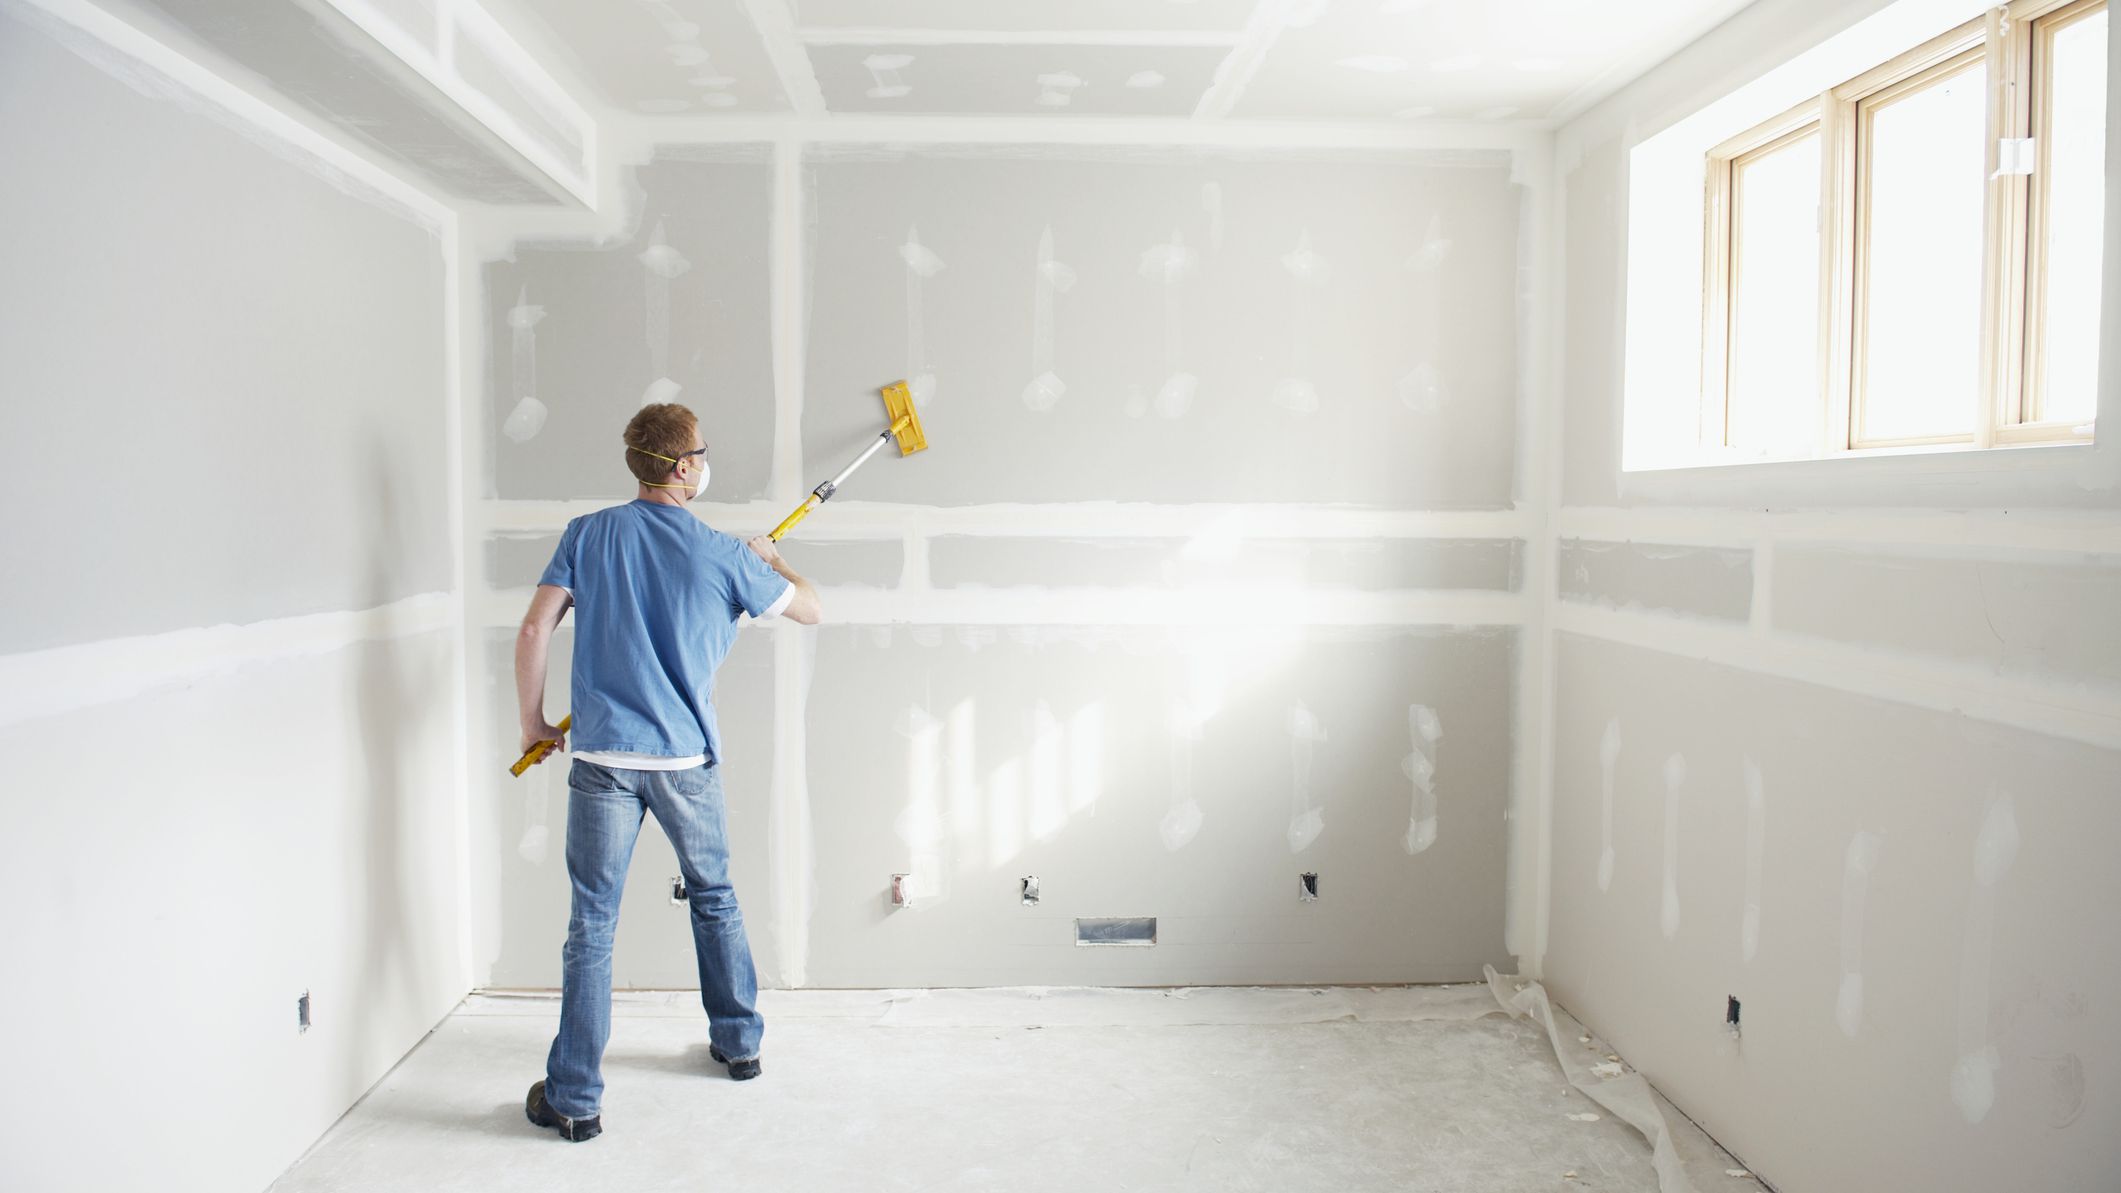 How To Start a Drywall Repair Business #12 - damianmartinez.com